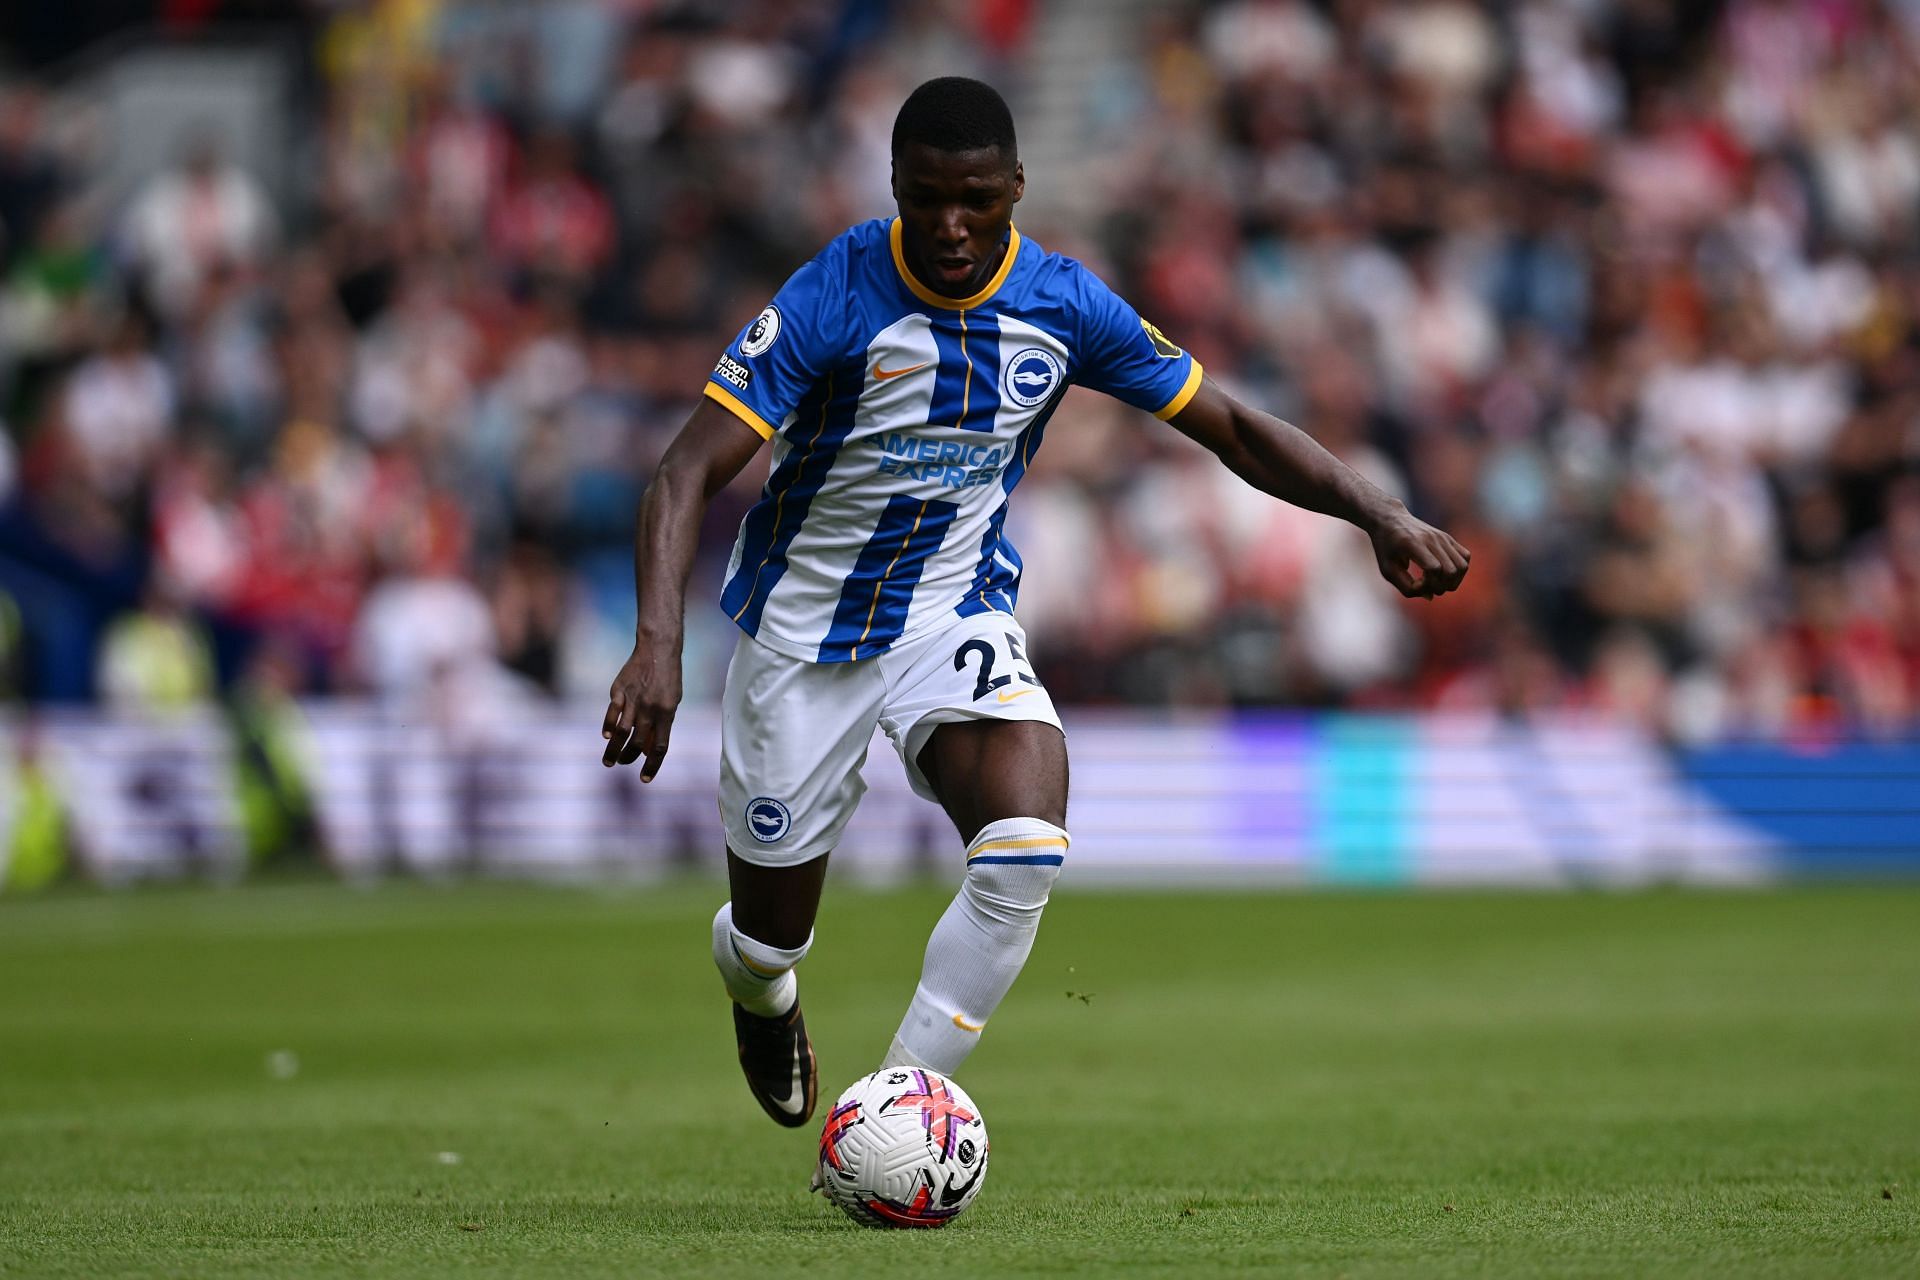 Caicedo is wanted by both London clubs